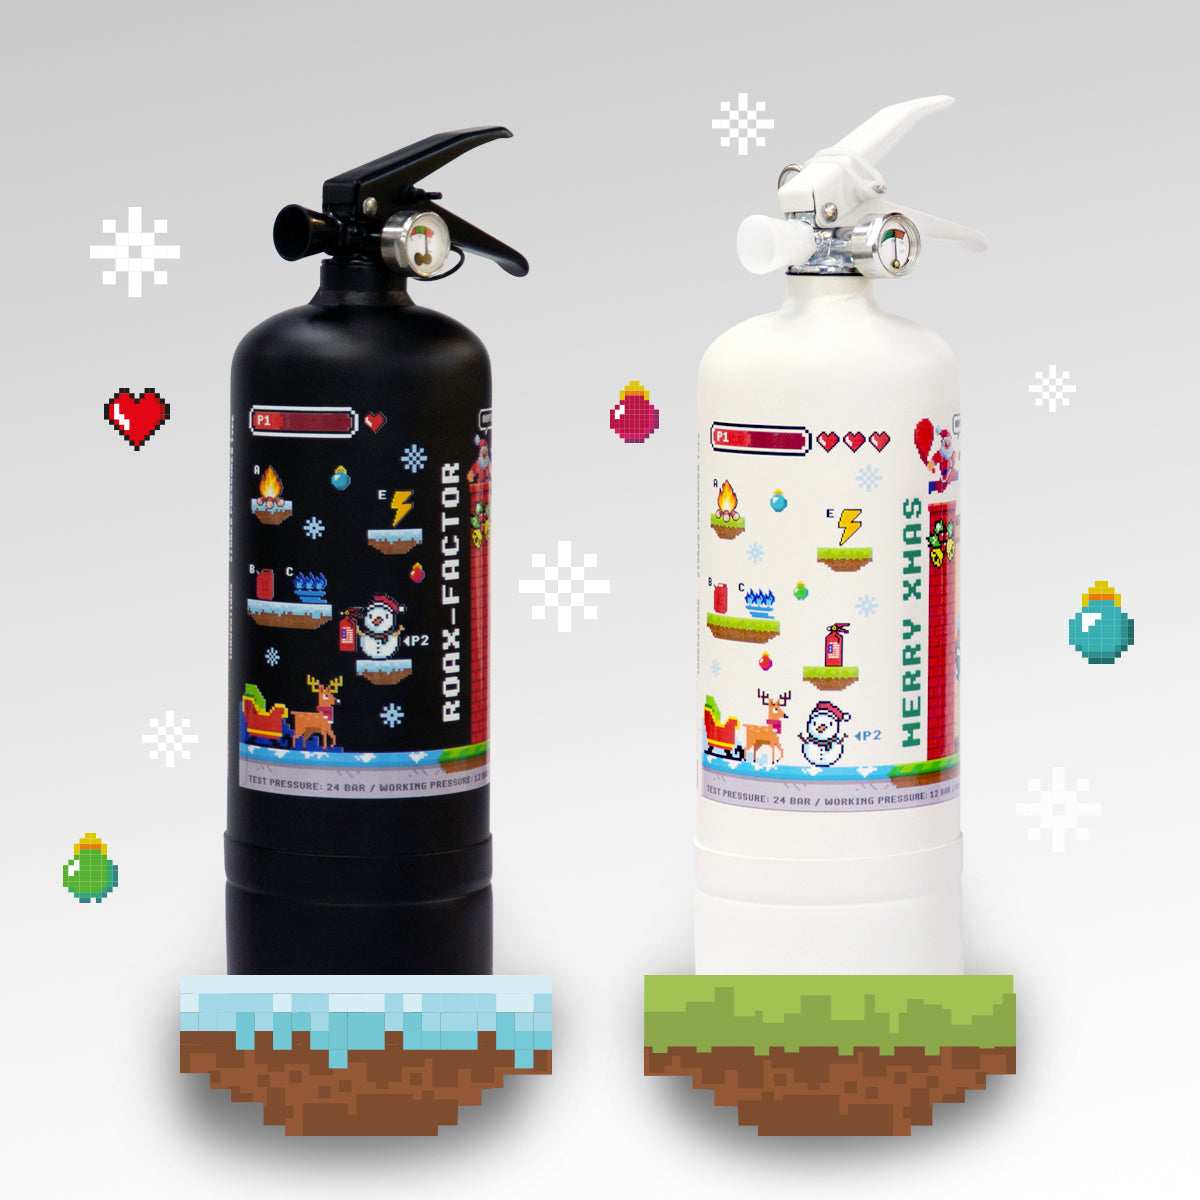 Naughty or Nice X'mas Edition 1kg Fire Extinguisher